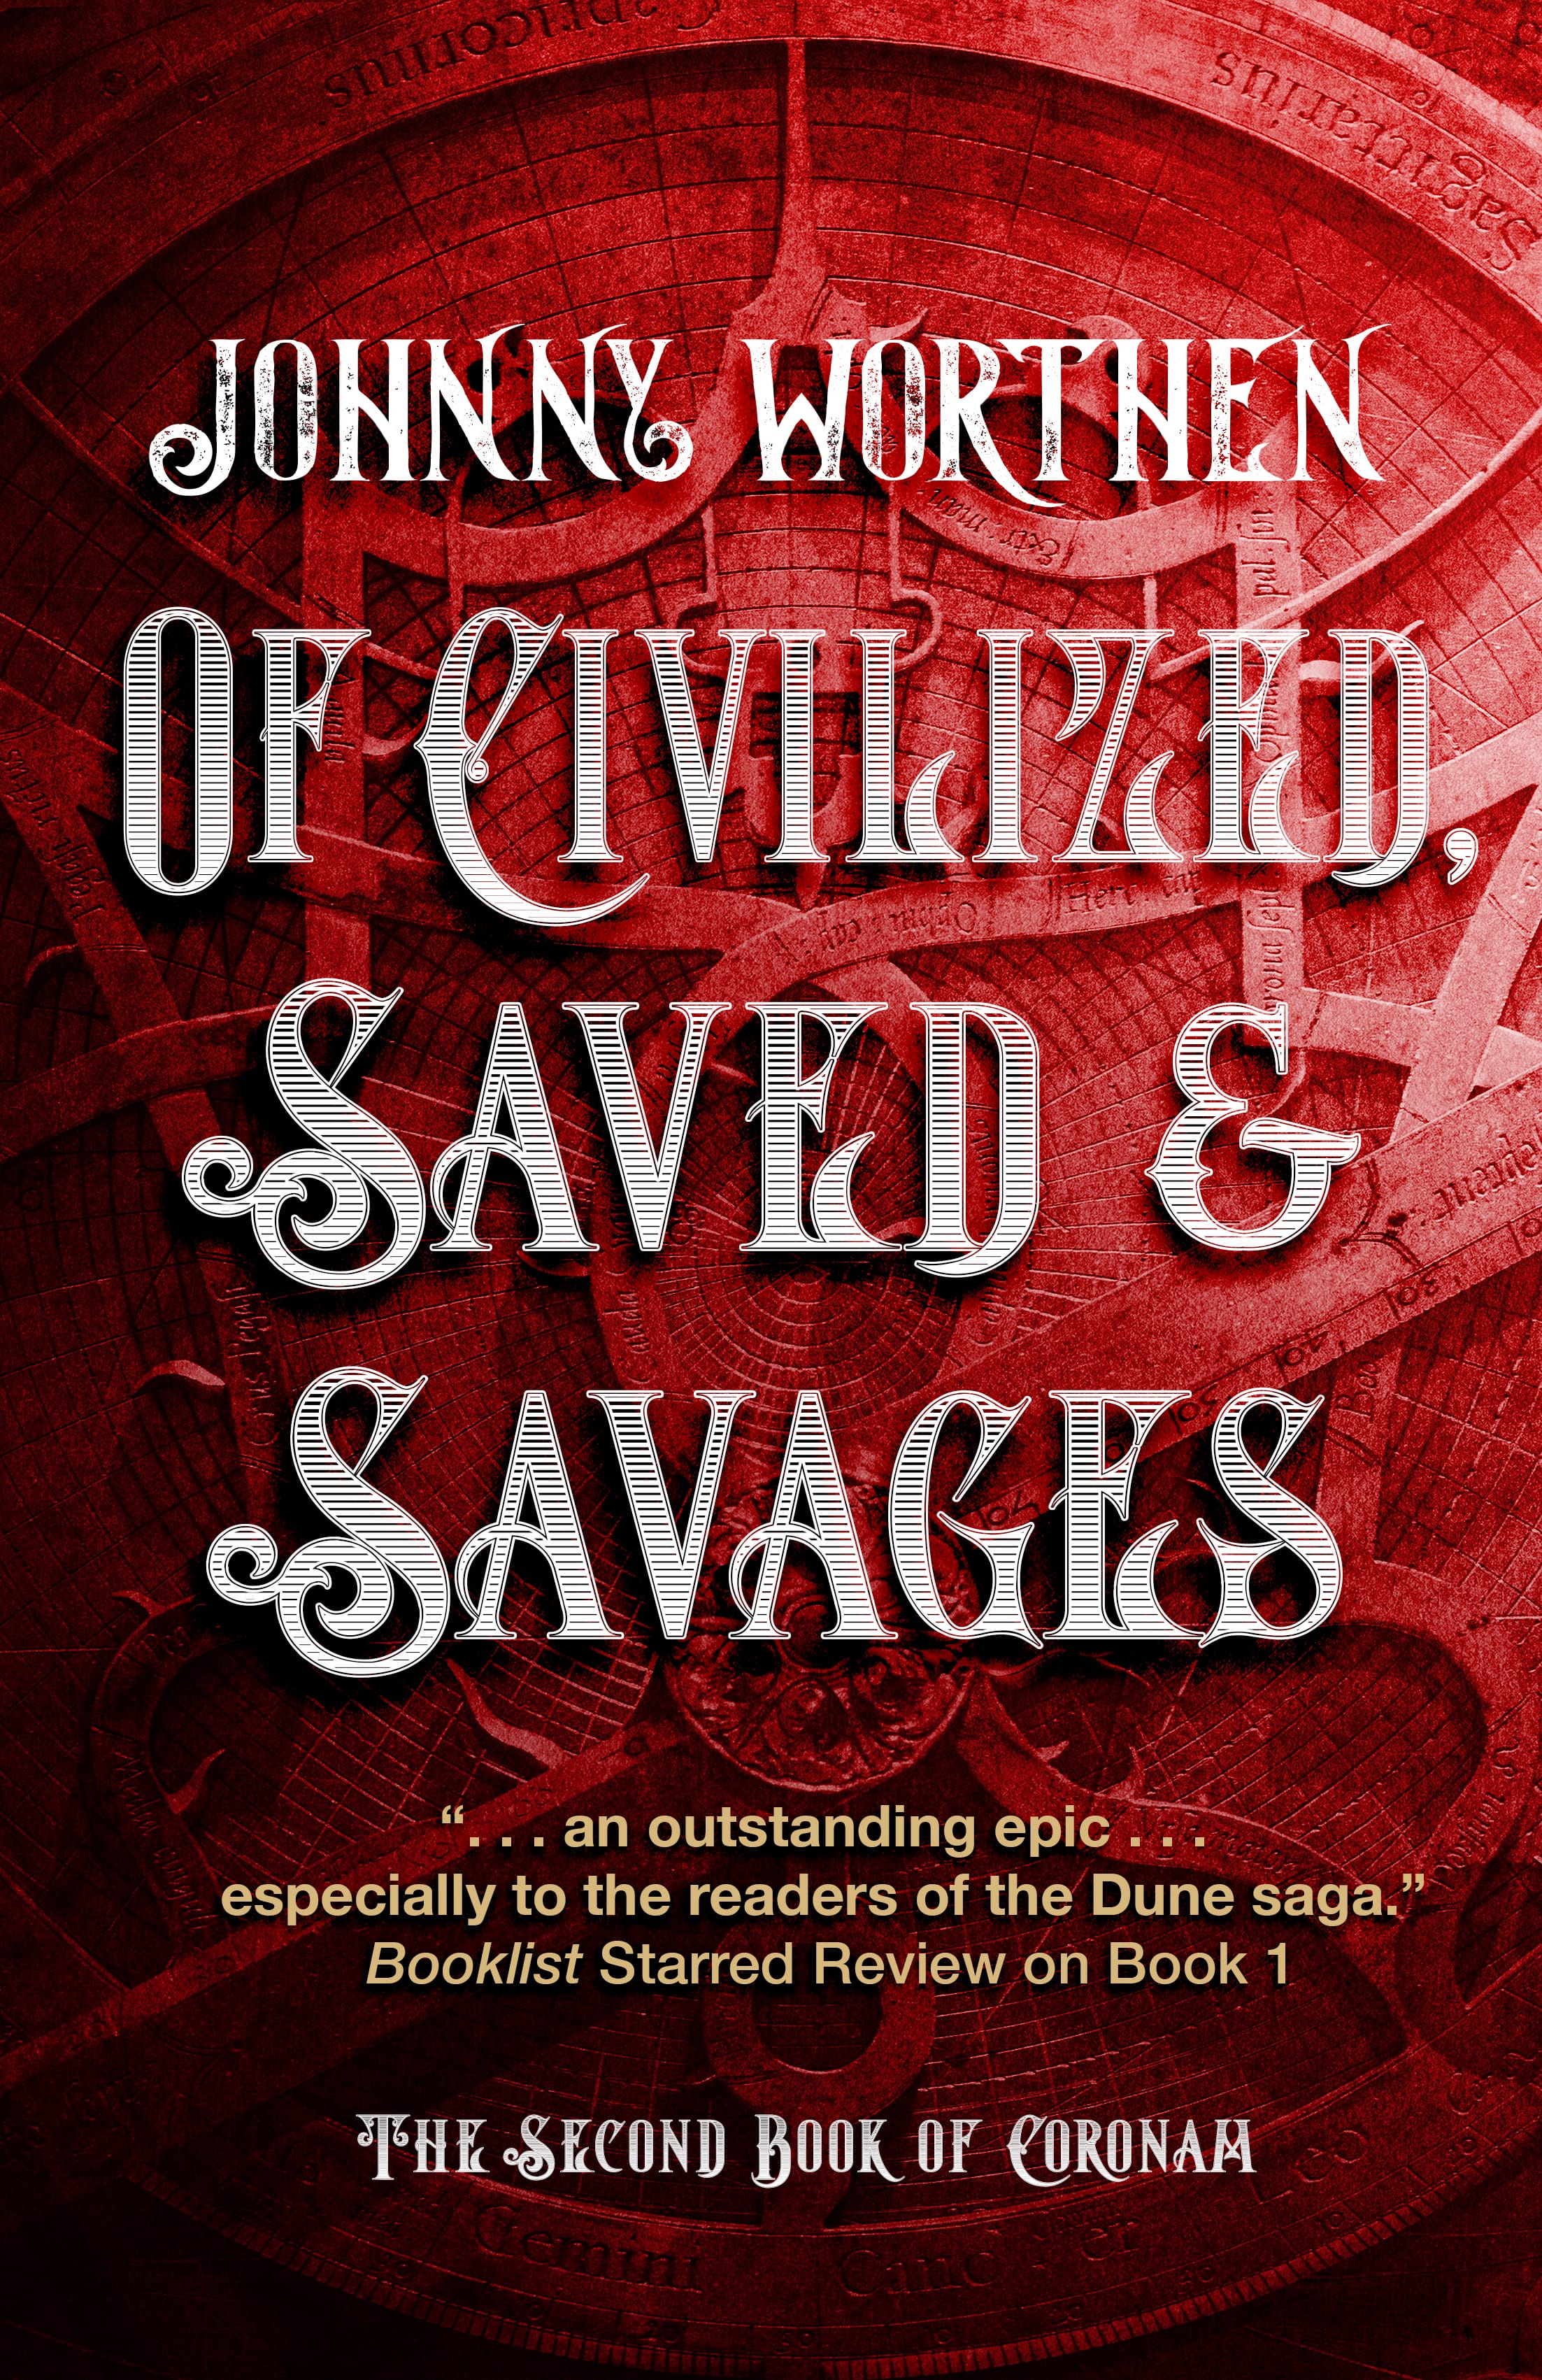 Of Civilized, Saved and Savages